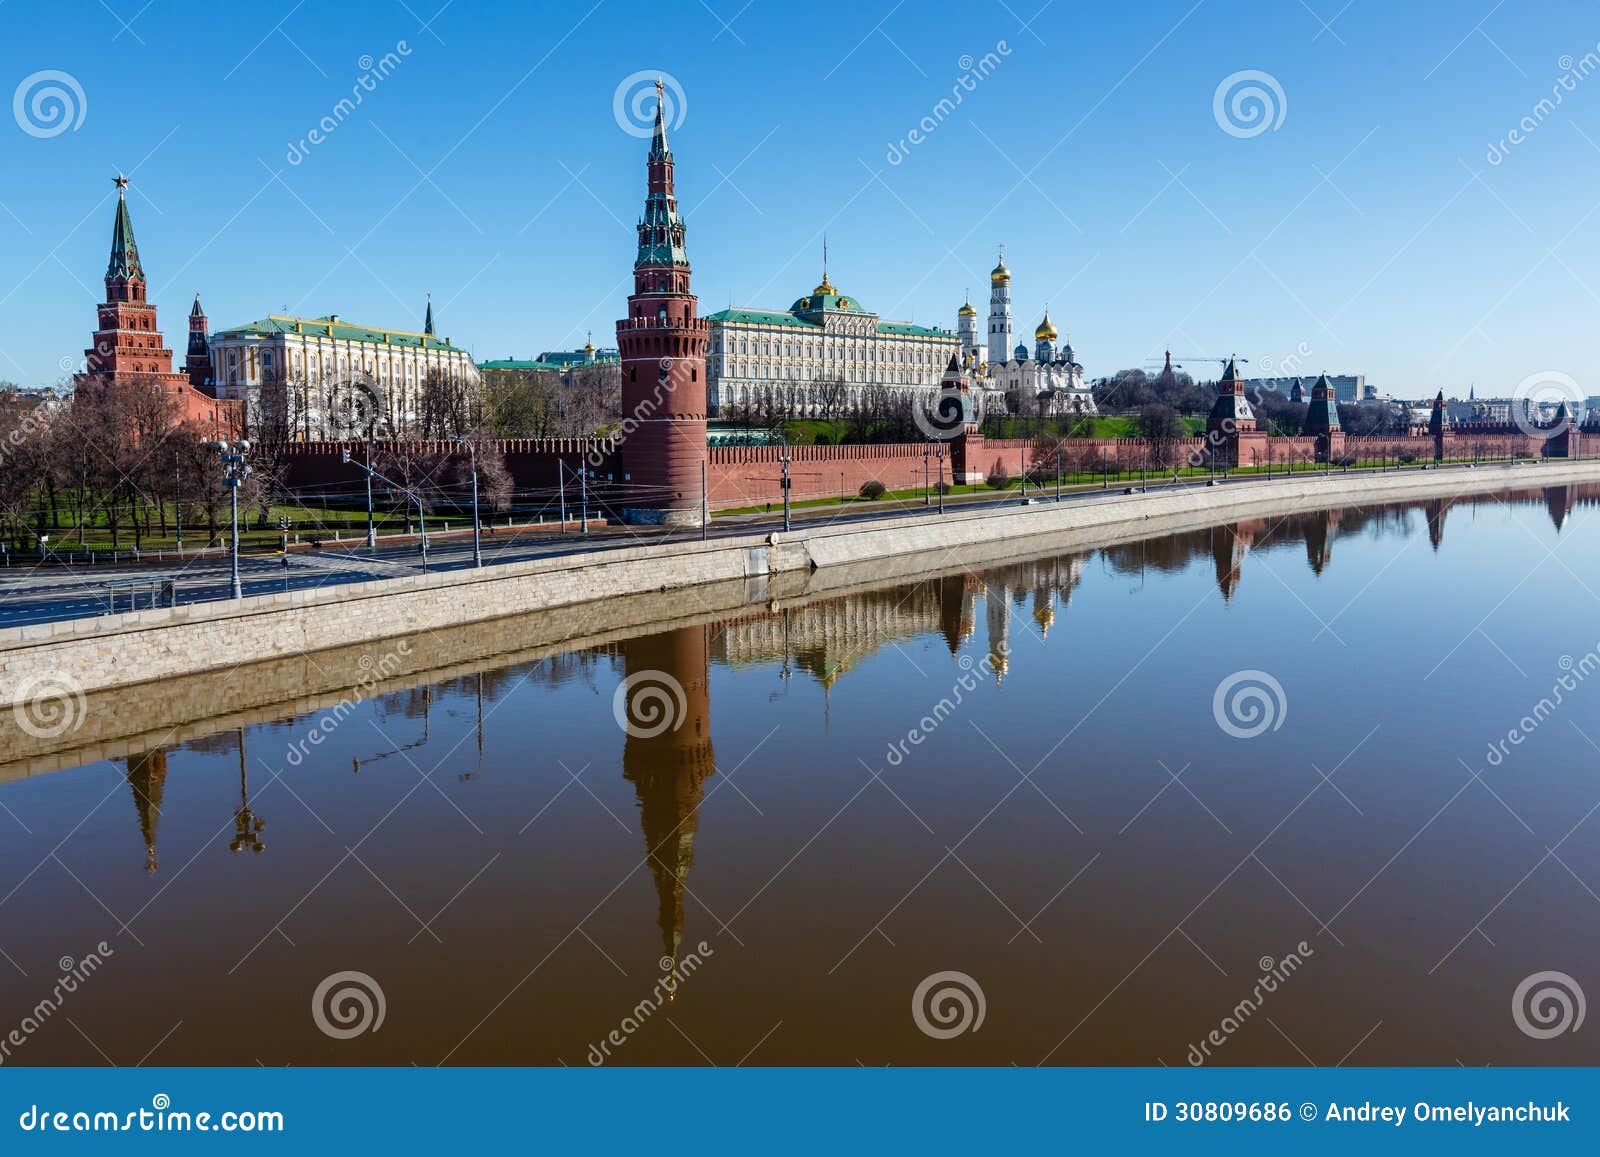 moscow kremlin and ivan the great bell tower